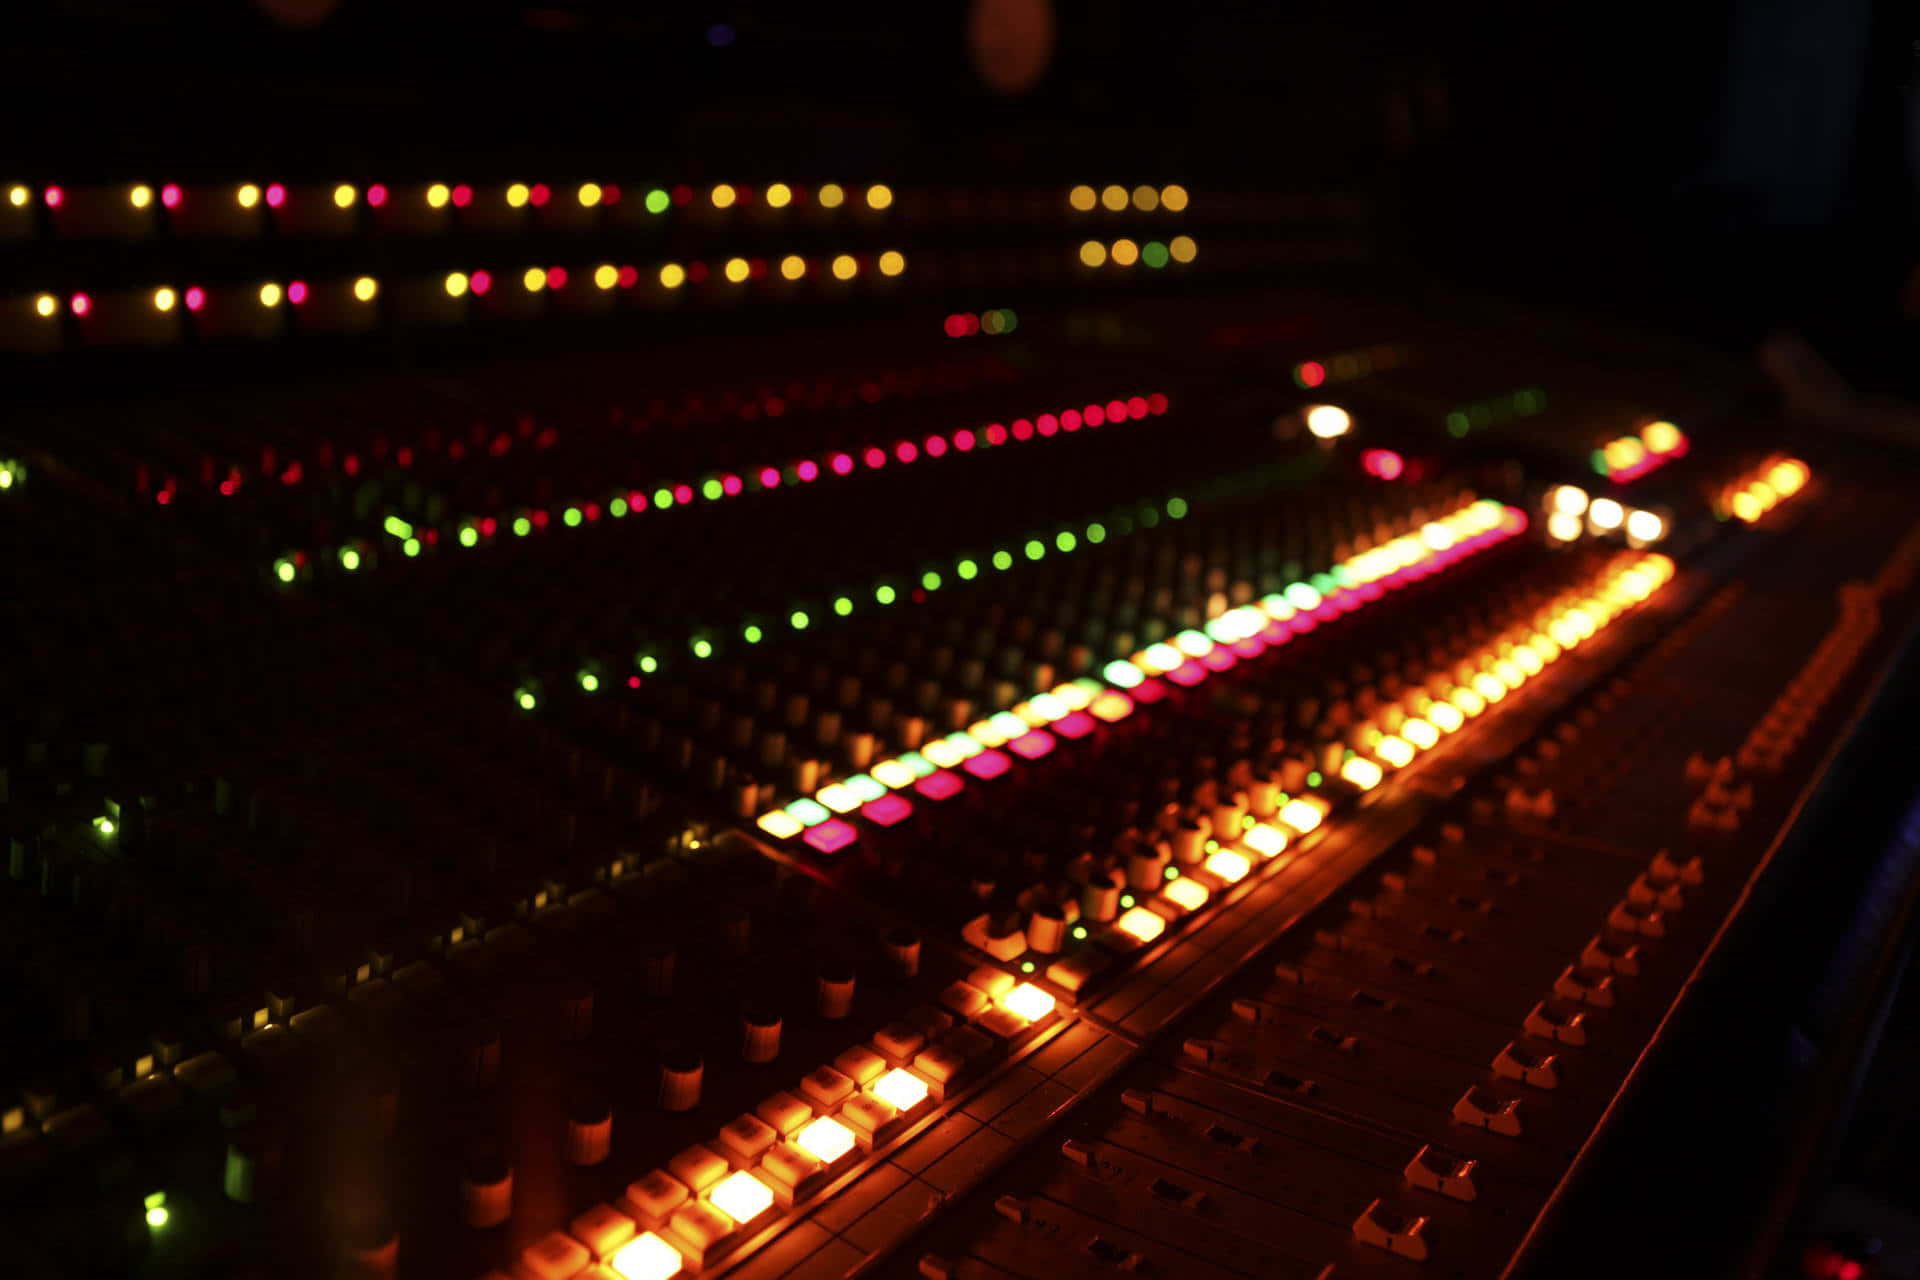 A Recording Console With Many Lights